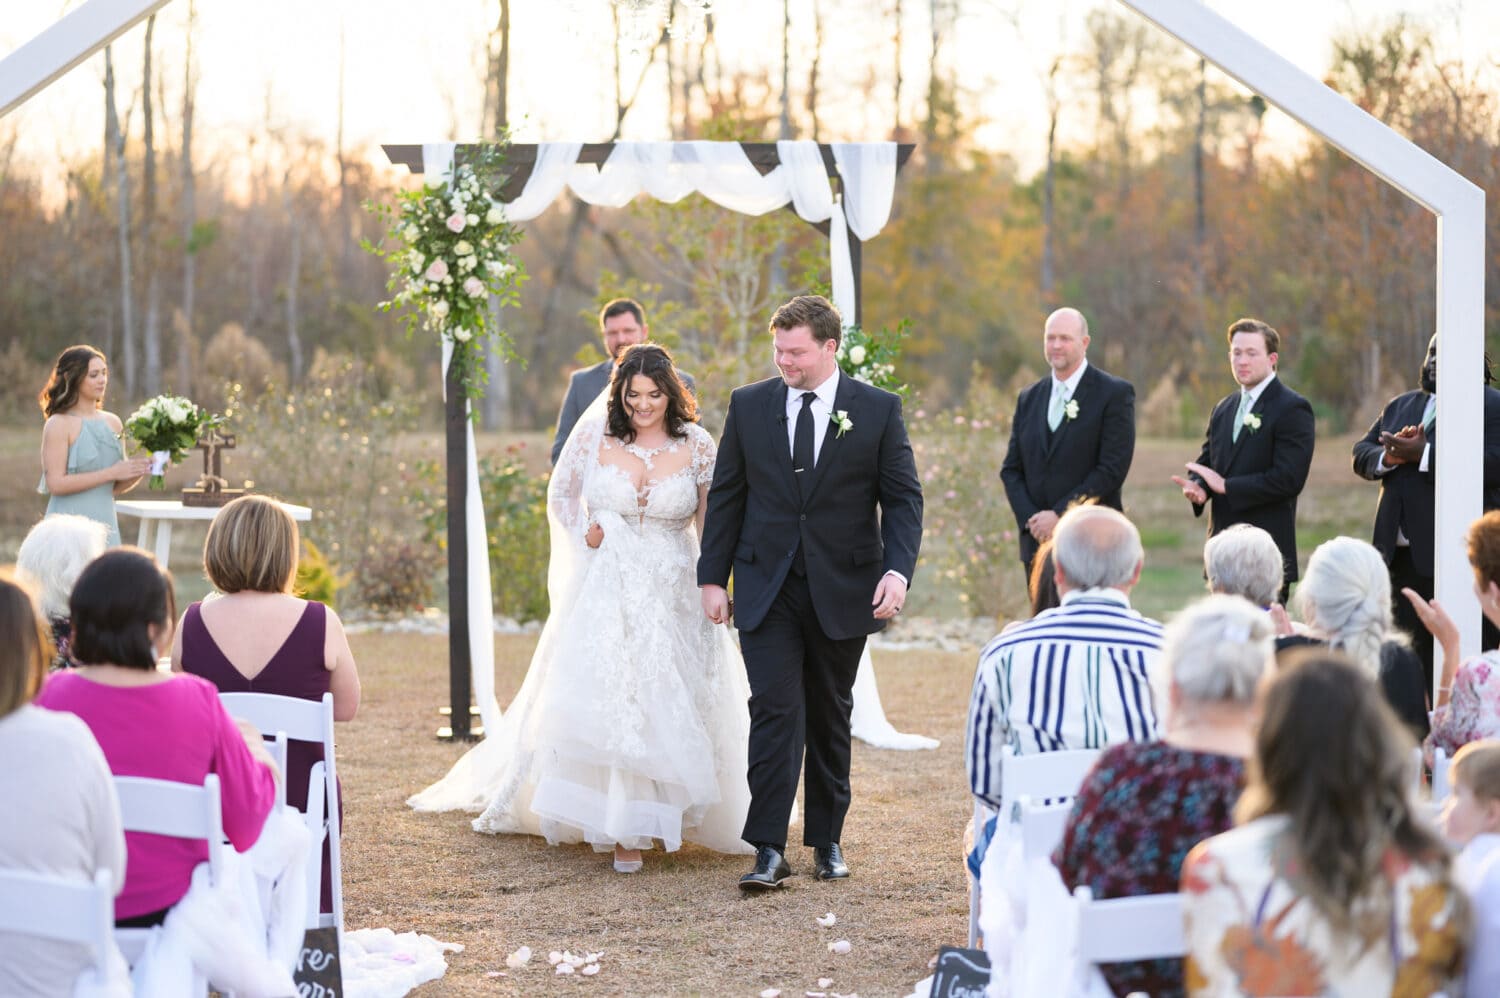 Just married - The Venue at White Oaks Farm